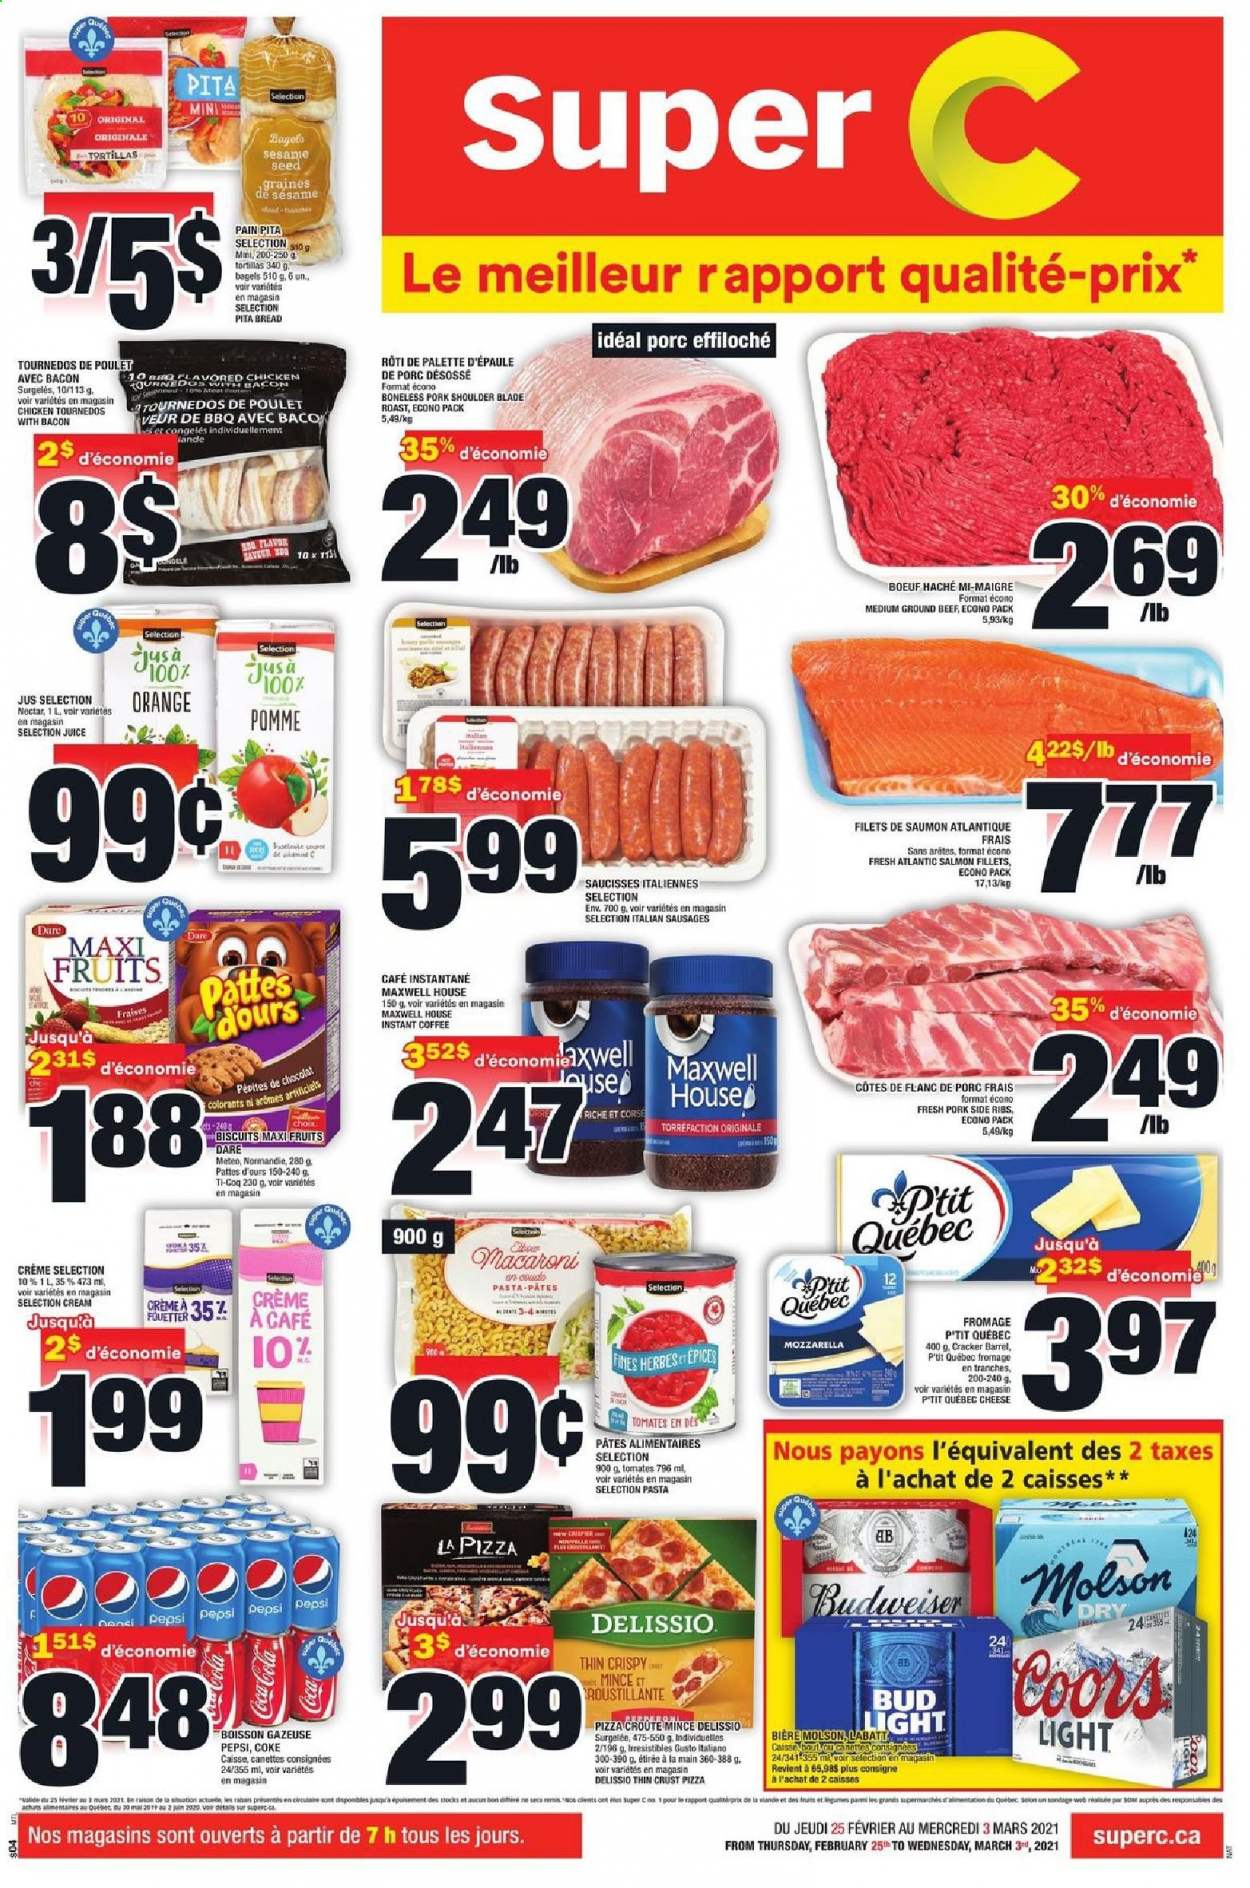 thumbnail - Super C Flyer - February 25, 2021 - March 03, 2021 - Sales products - bagels, bread, tortillas, pita, salmon, salmon fillet, pizza, macaroni, pasta, sausage, Mars, crackers, biscuit, sesame seed, Coca-Cola, Pepsi, juice, Maxwell House, instant coffee, beer, Coors, Bud Light, beef meat, ground beef, pork meat, pork shoulder, Palette. Page 1.